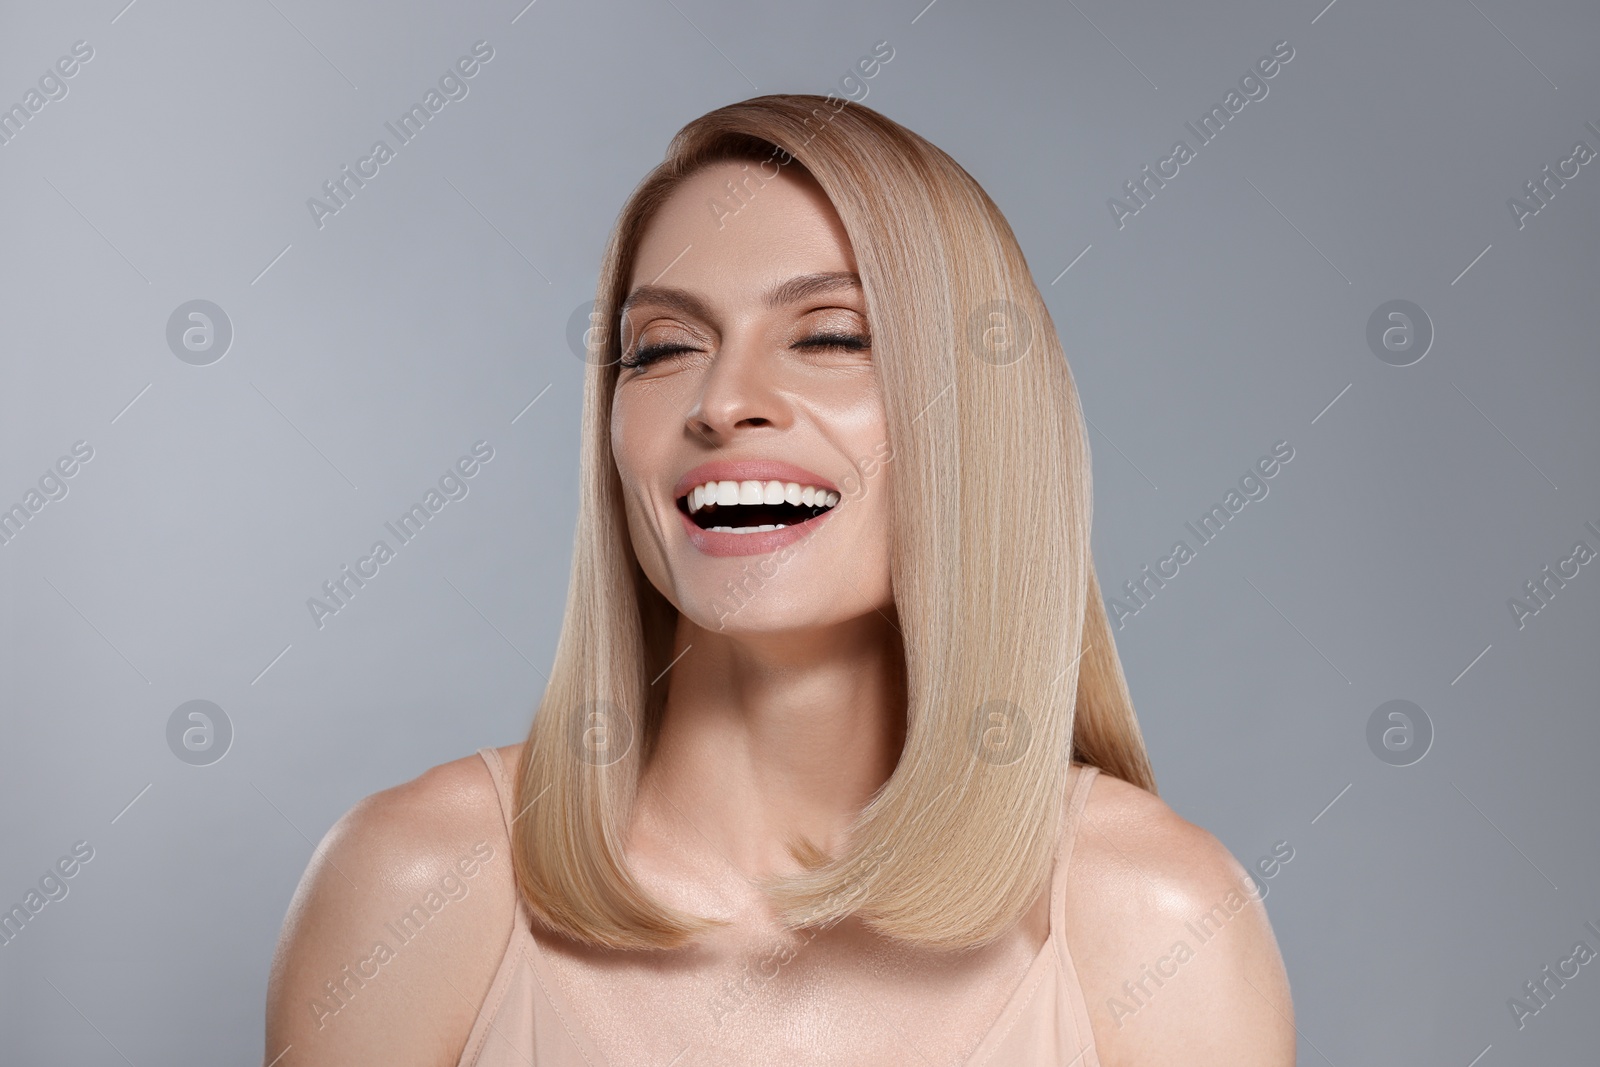 Image of Portrait of attractive woman with blonde hair smiling on grey background